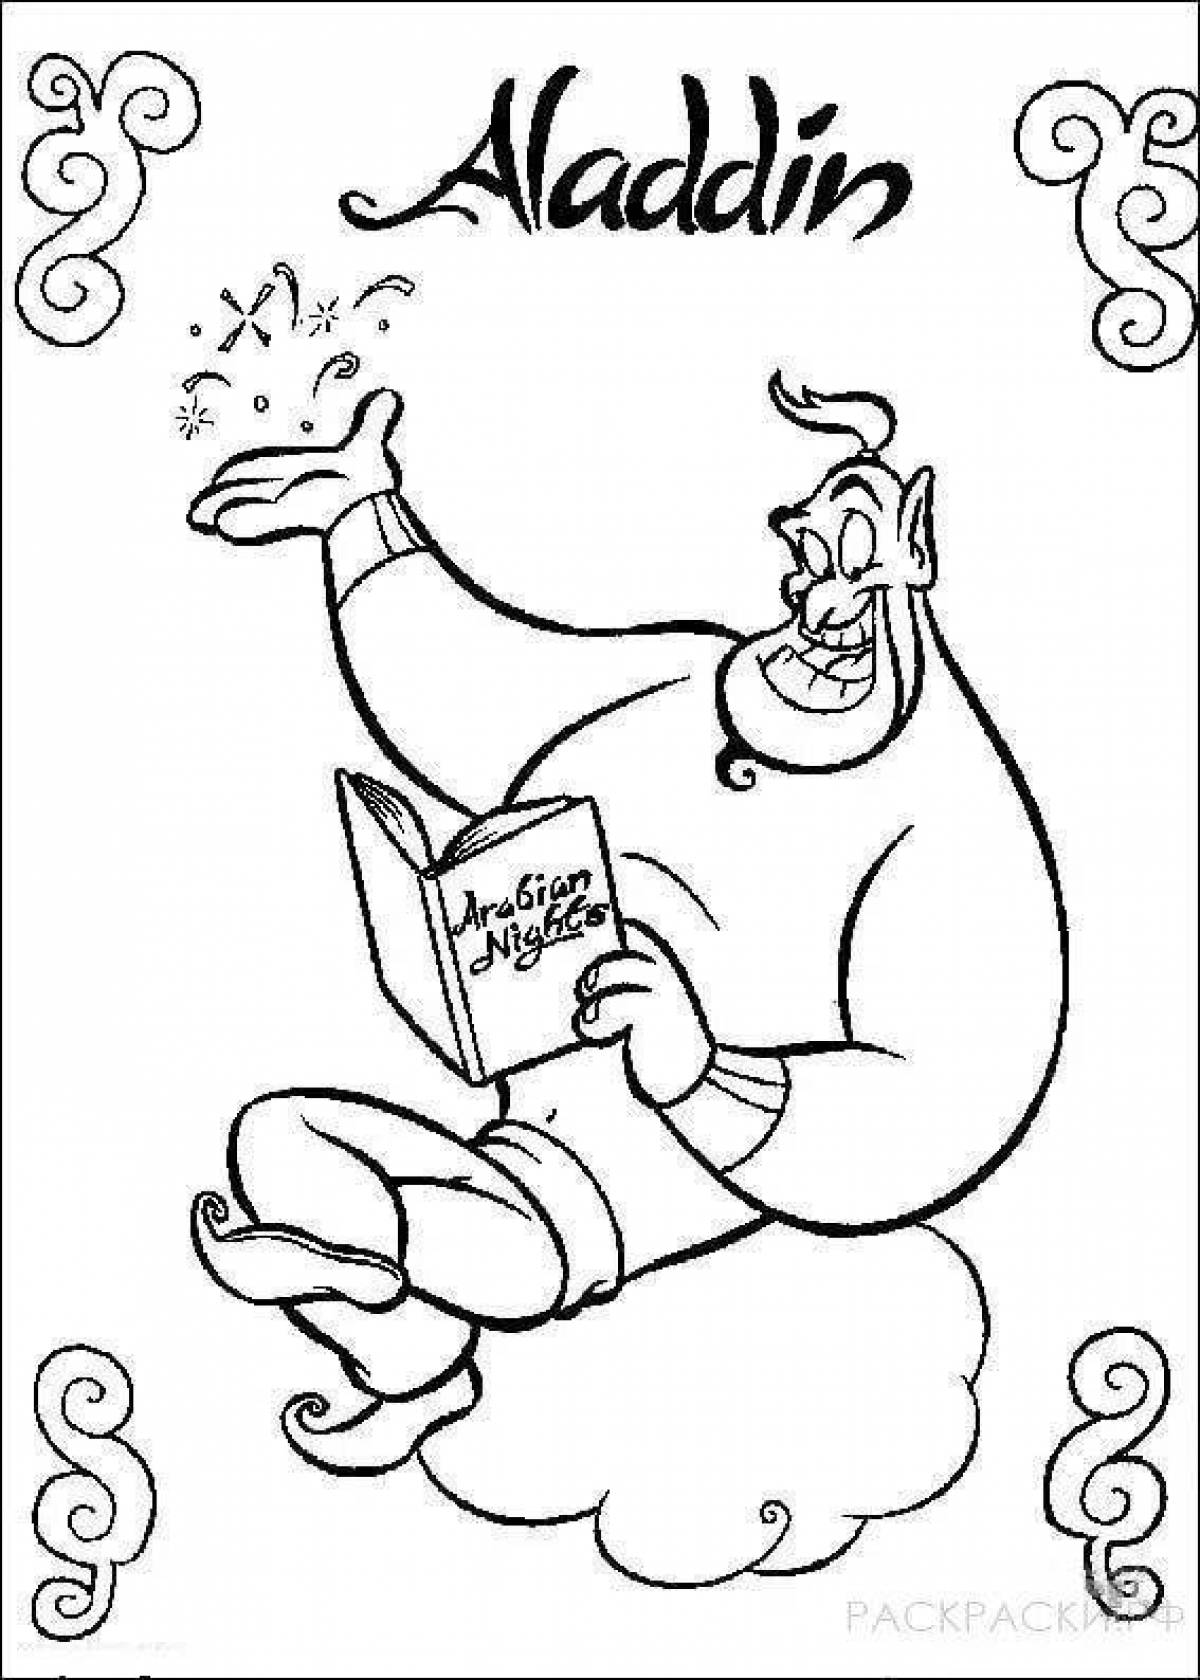 Genie's awesome coloring book